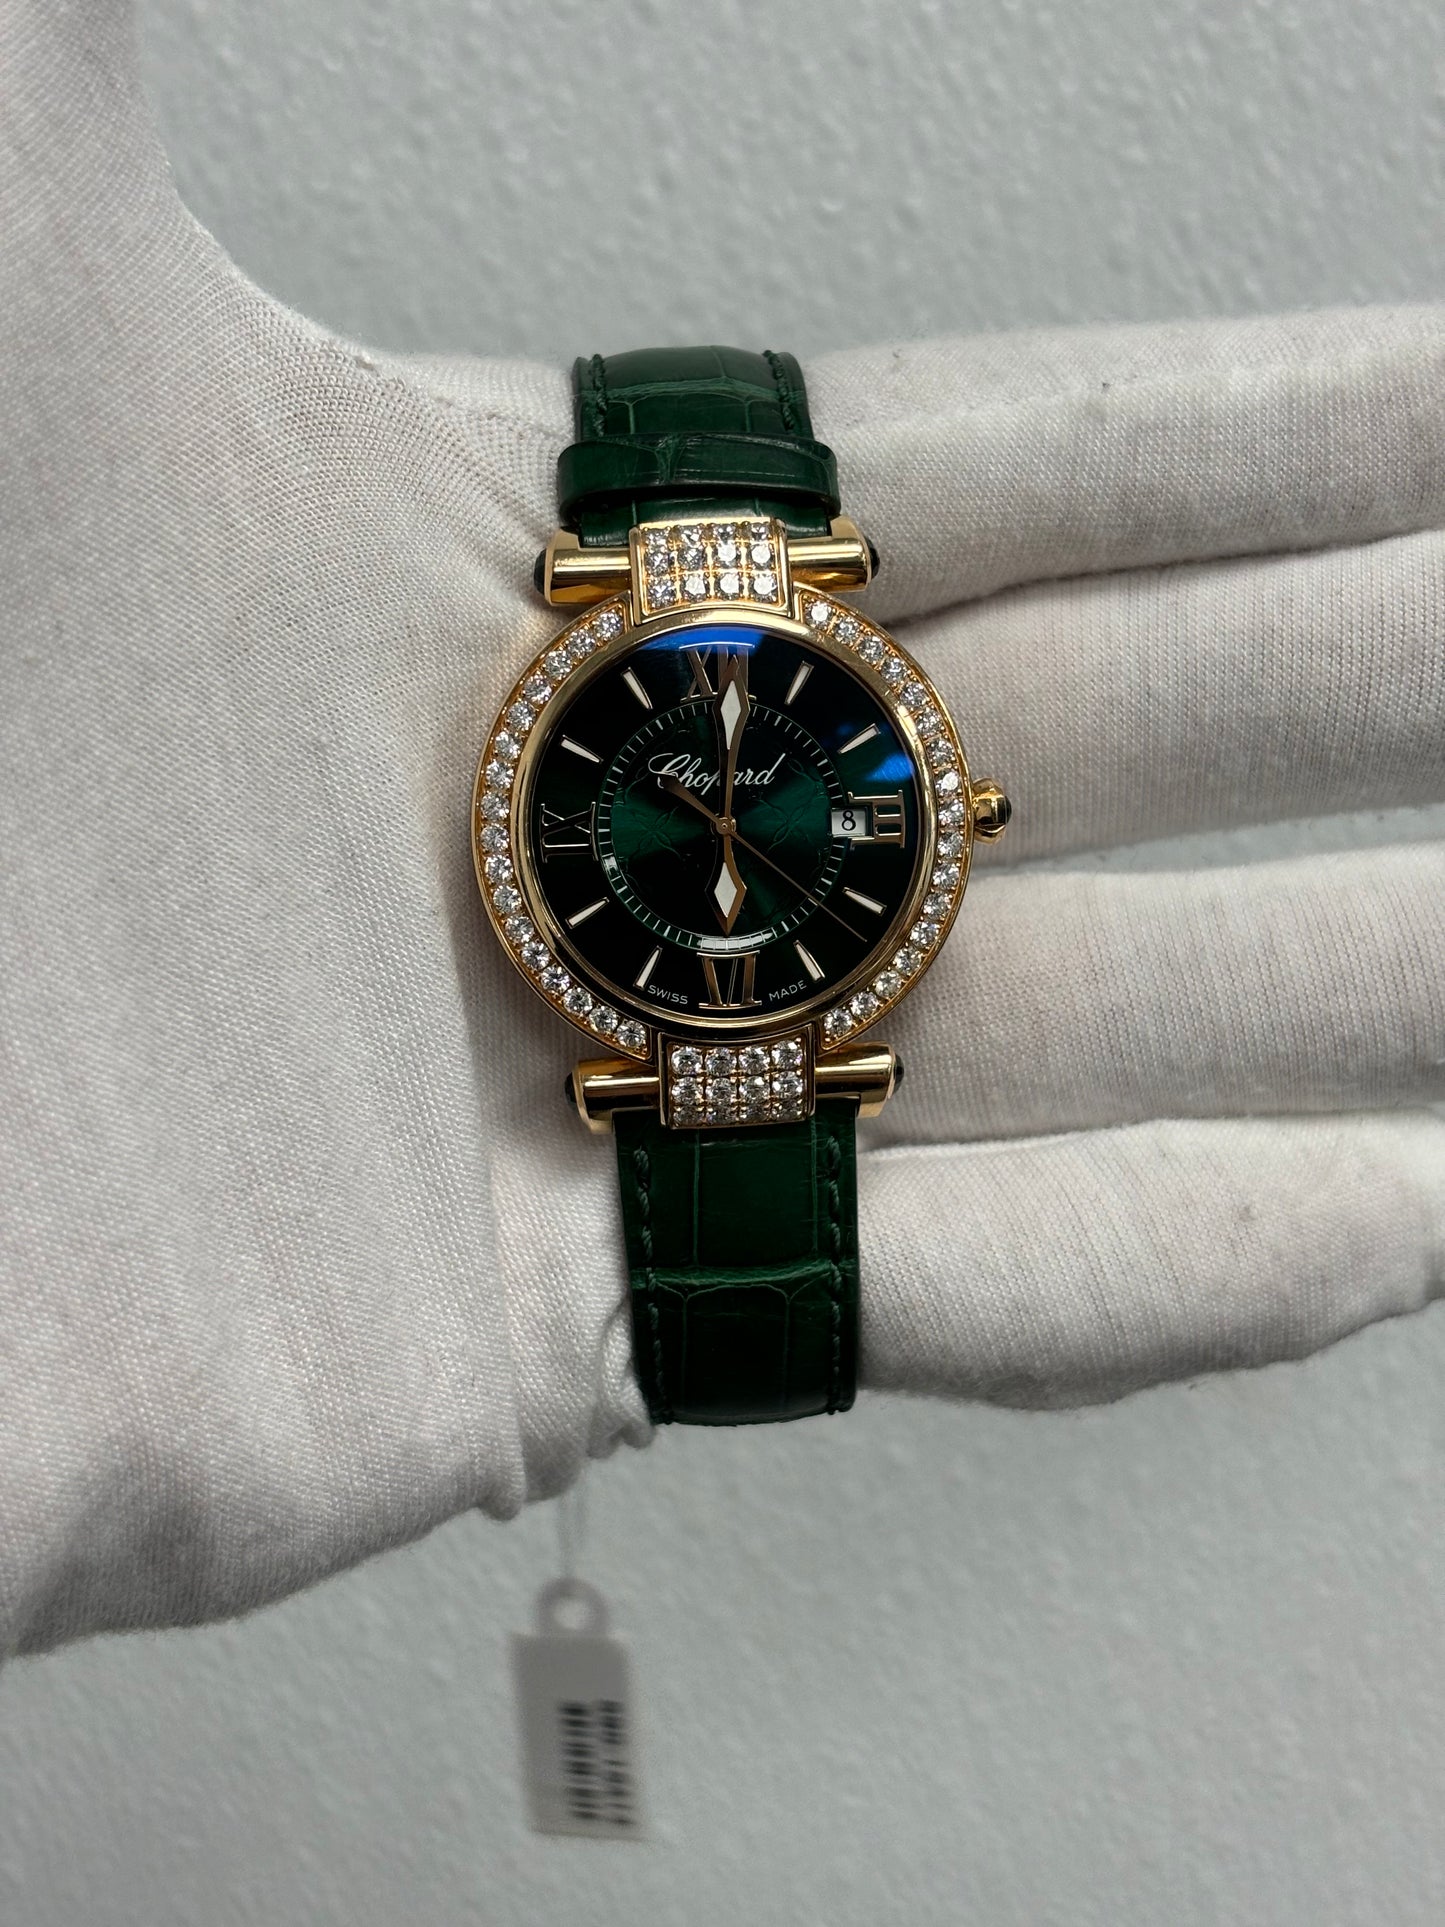 Chopard Imperiale 36mm Green Dial Ref# 384221-5013